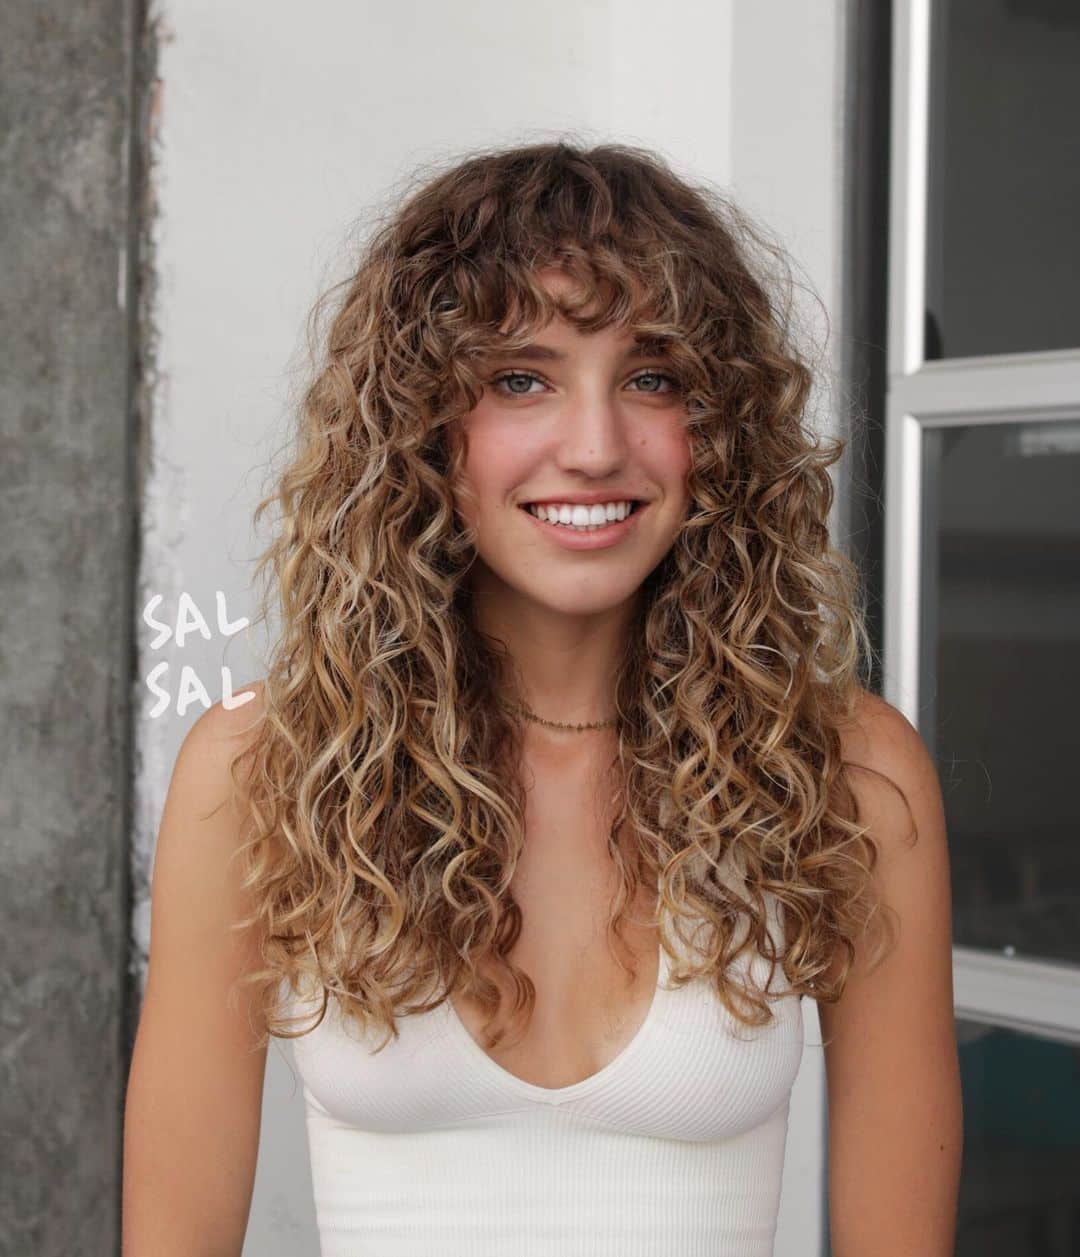 Blonde Long Curly Hairstyle with Bangs